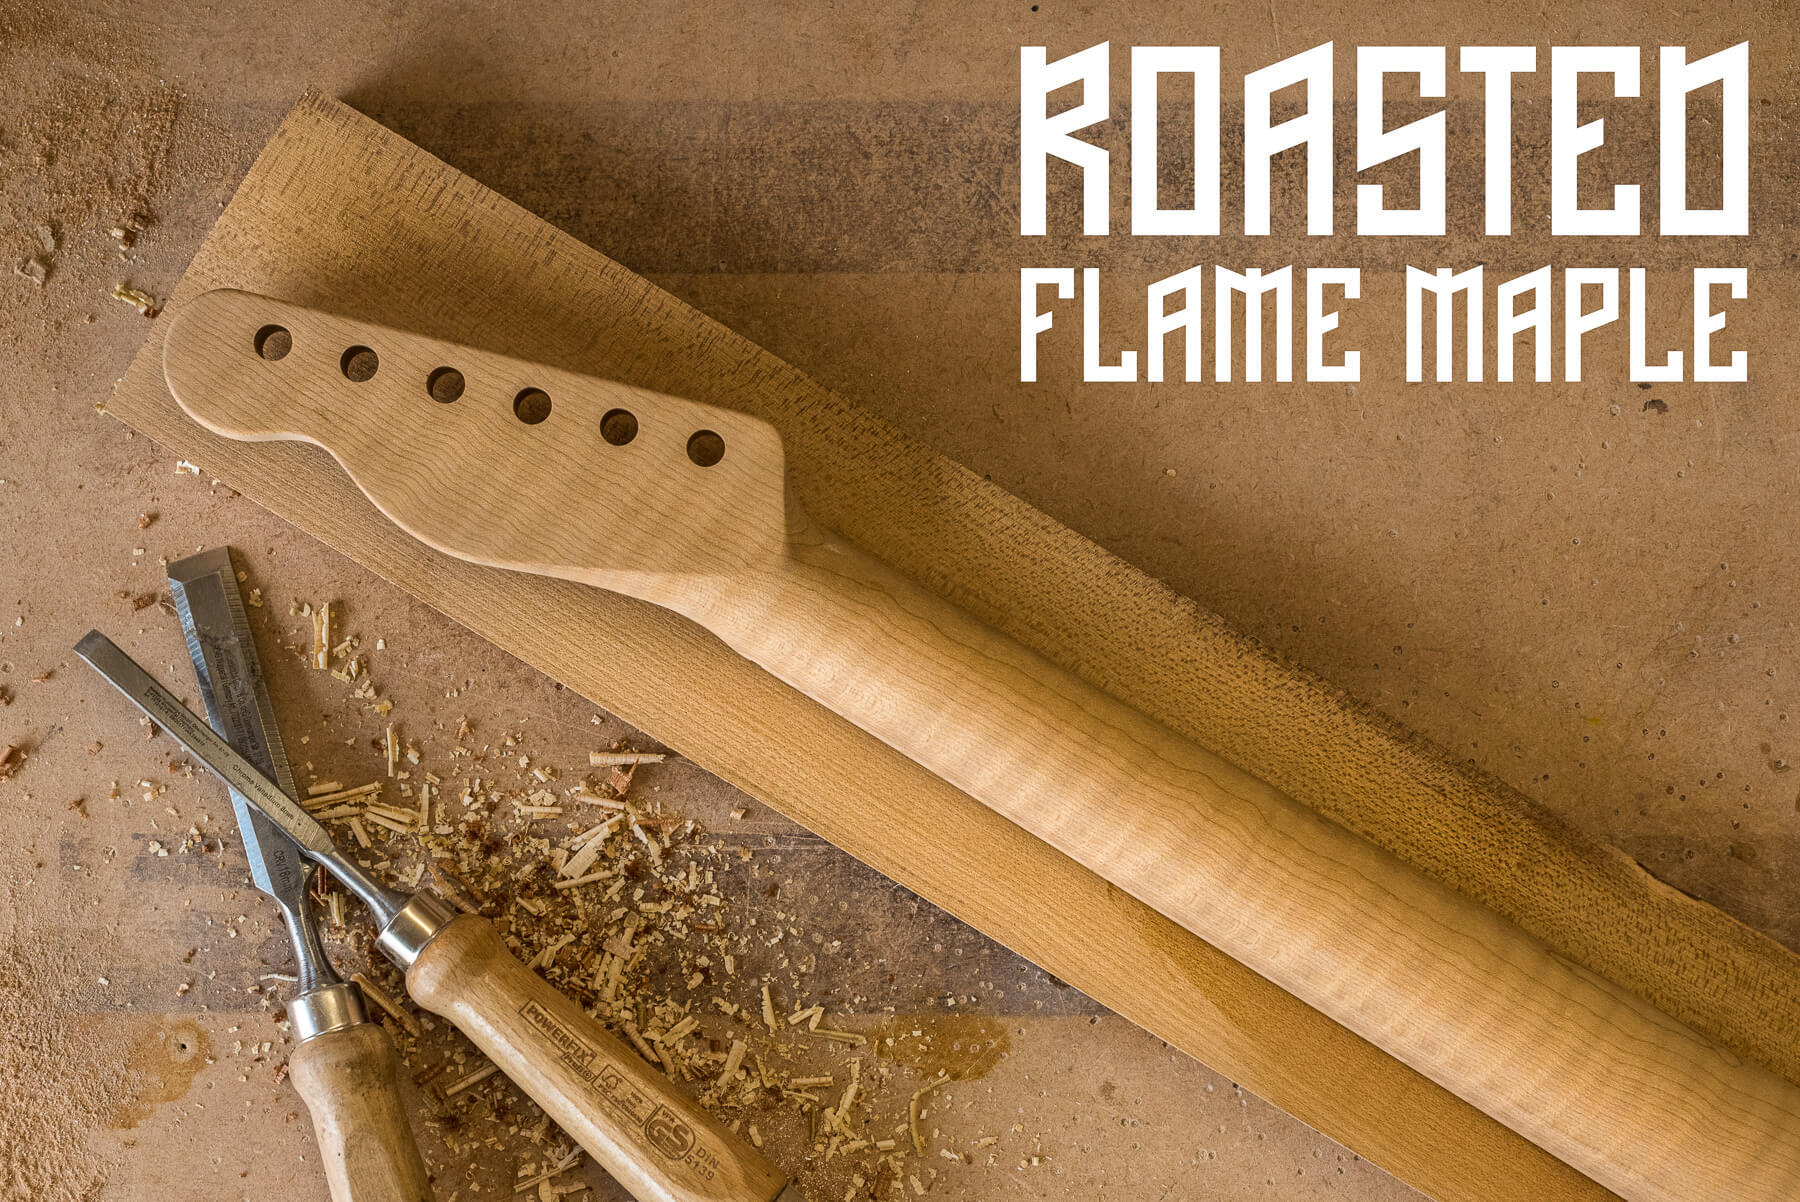 Neck Wood Roasted Flame Maple Cover Image